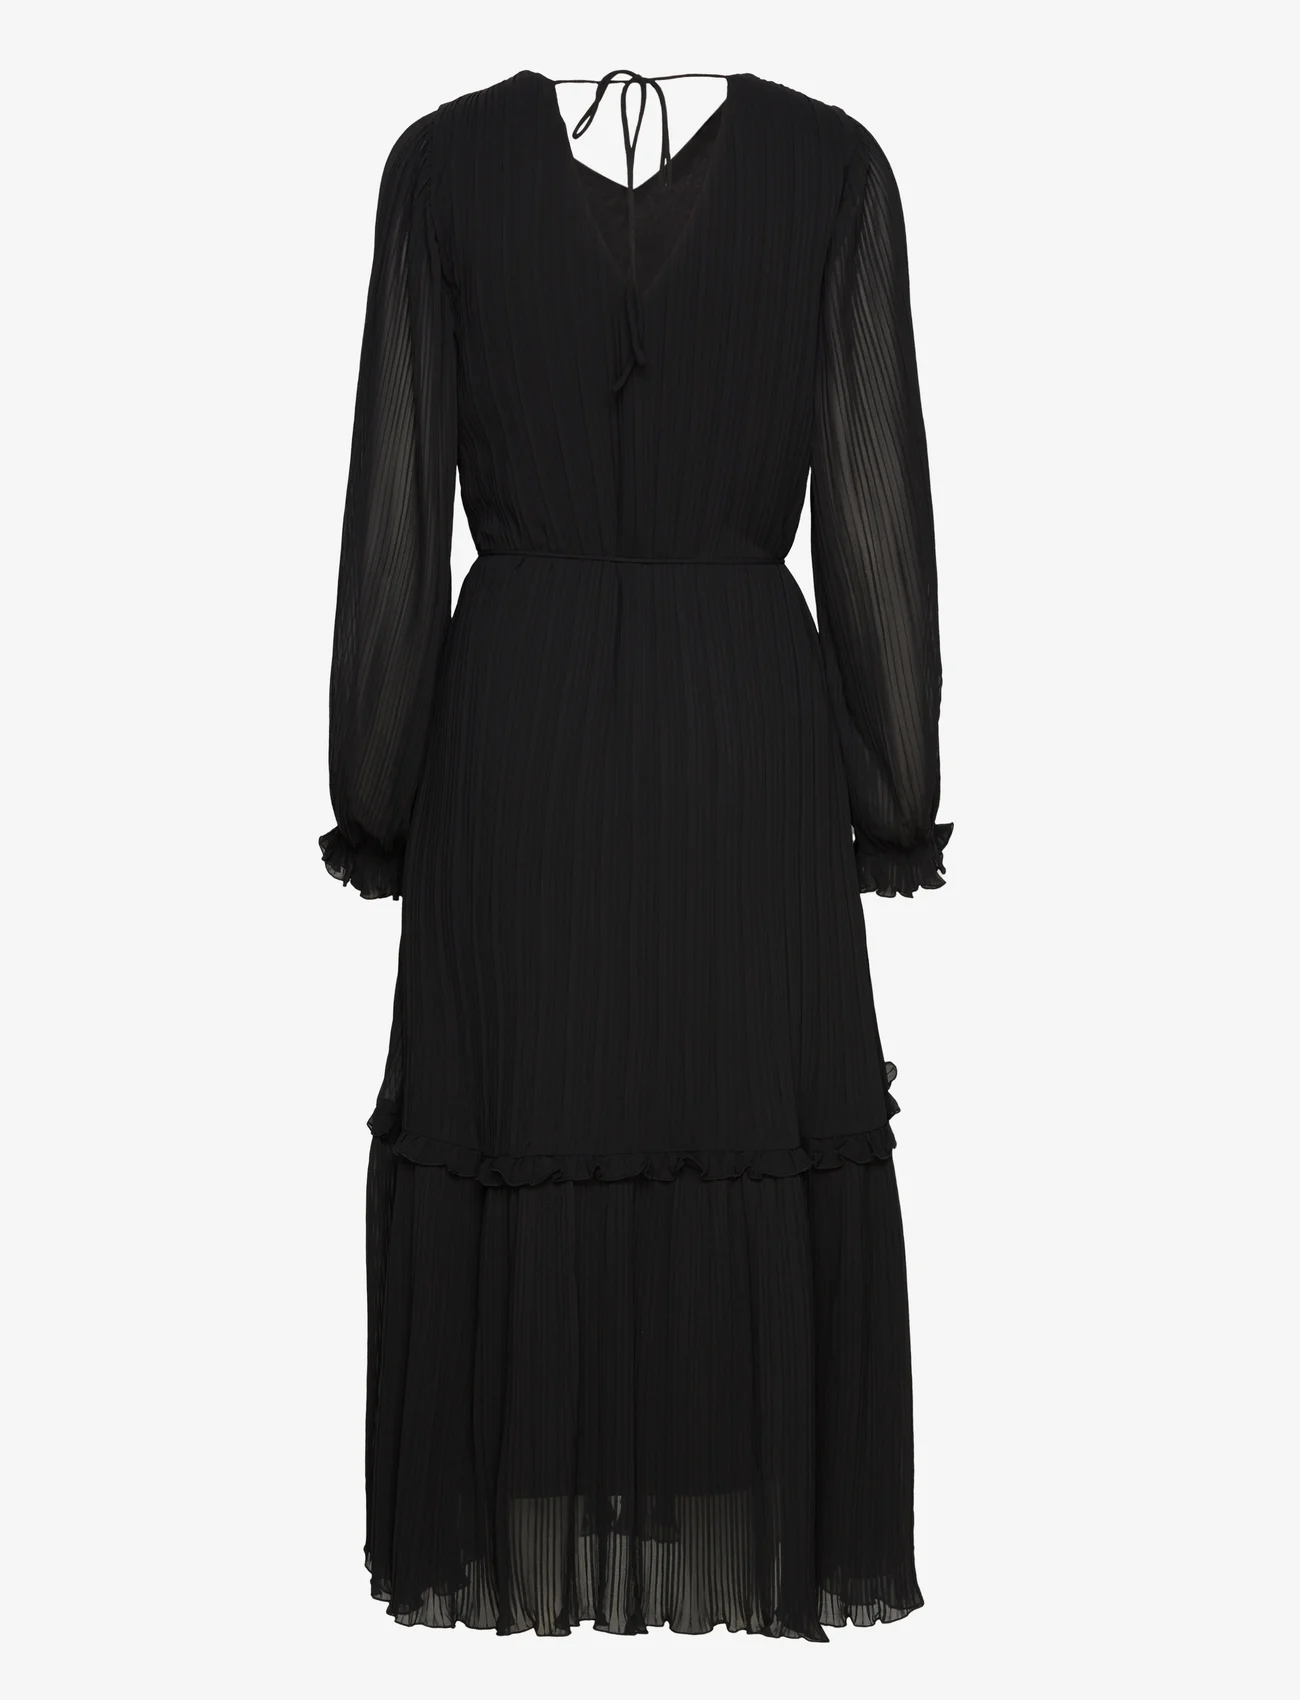 Bruuns Bazaar - Hebe Hamida dress - party wear at outlet prices - black - 1